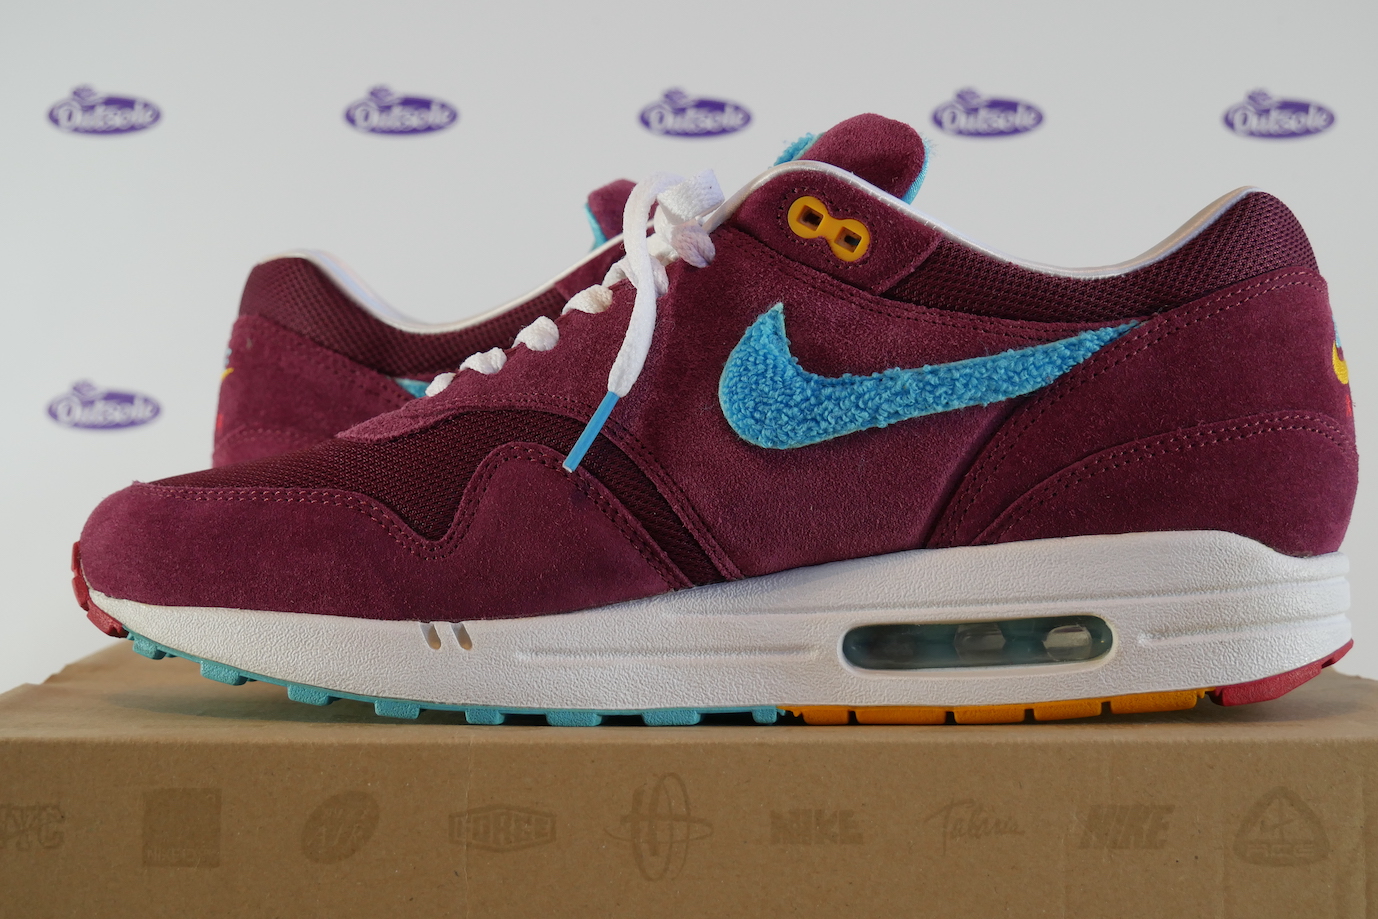 Nike Air Max 1 Patta Parra Cherrywood • ✓ In stock at Outsole